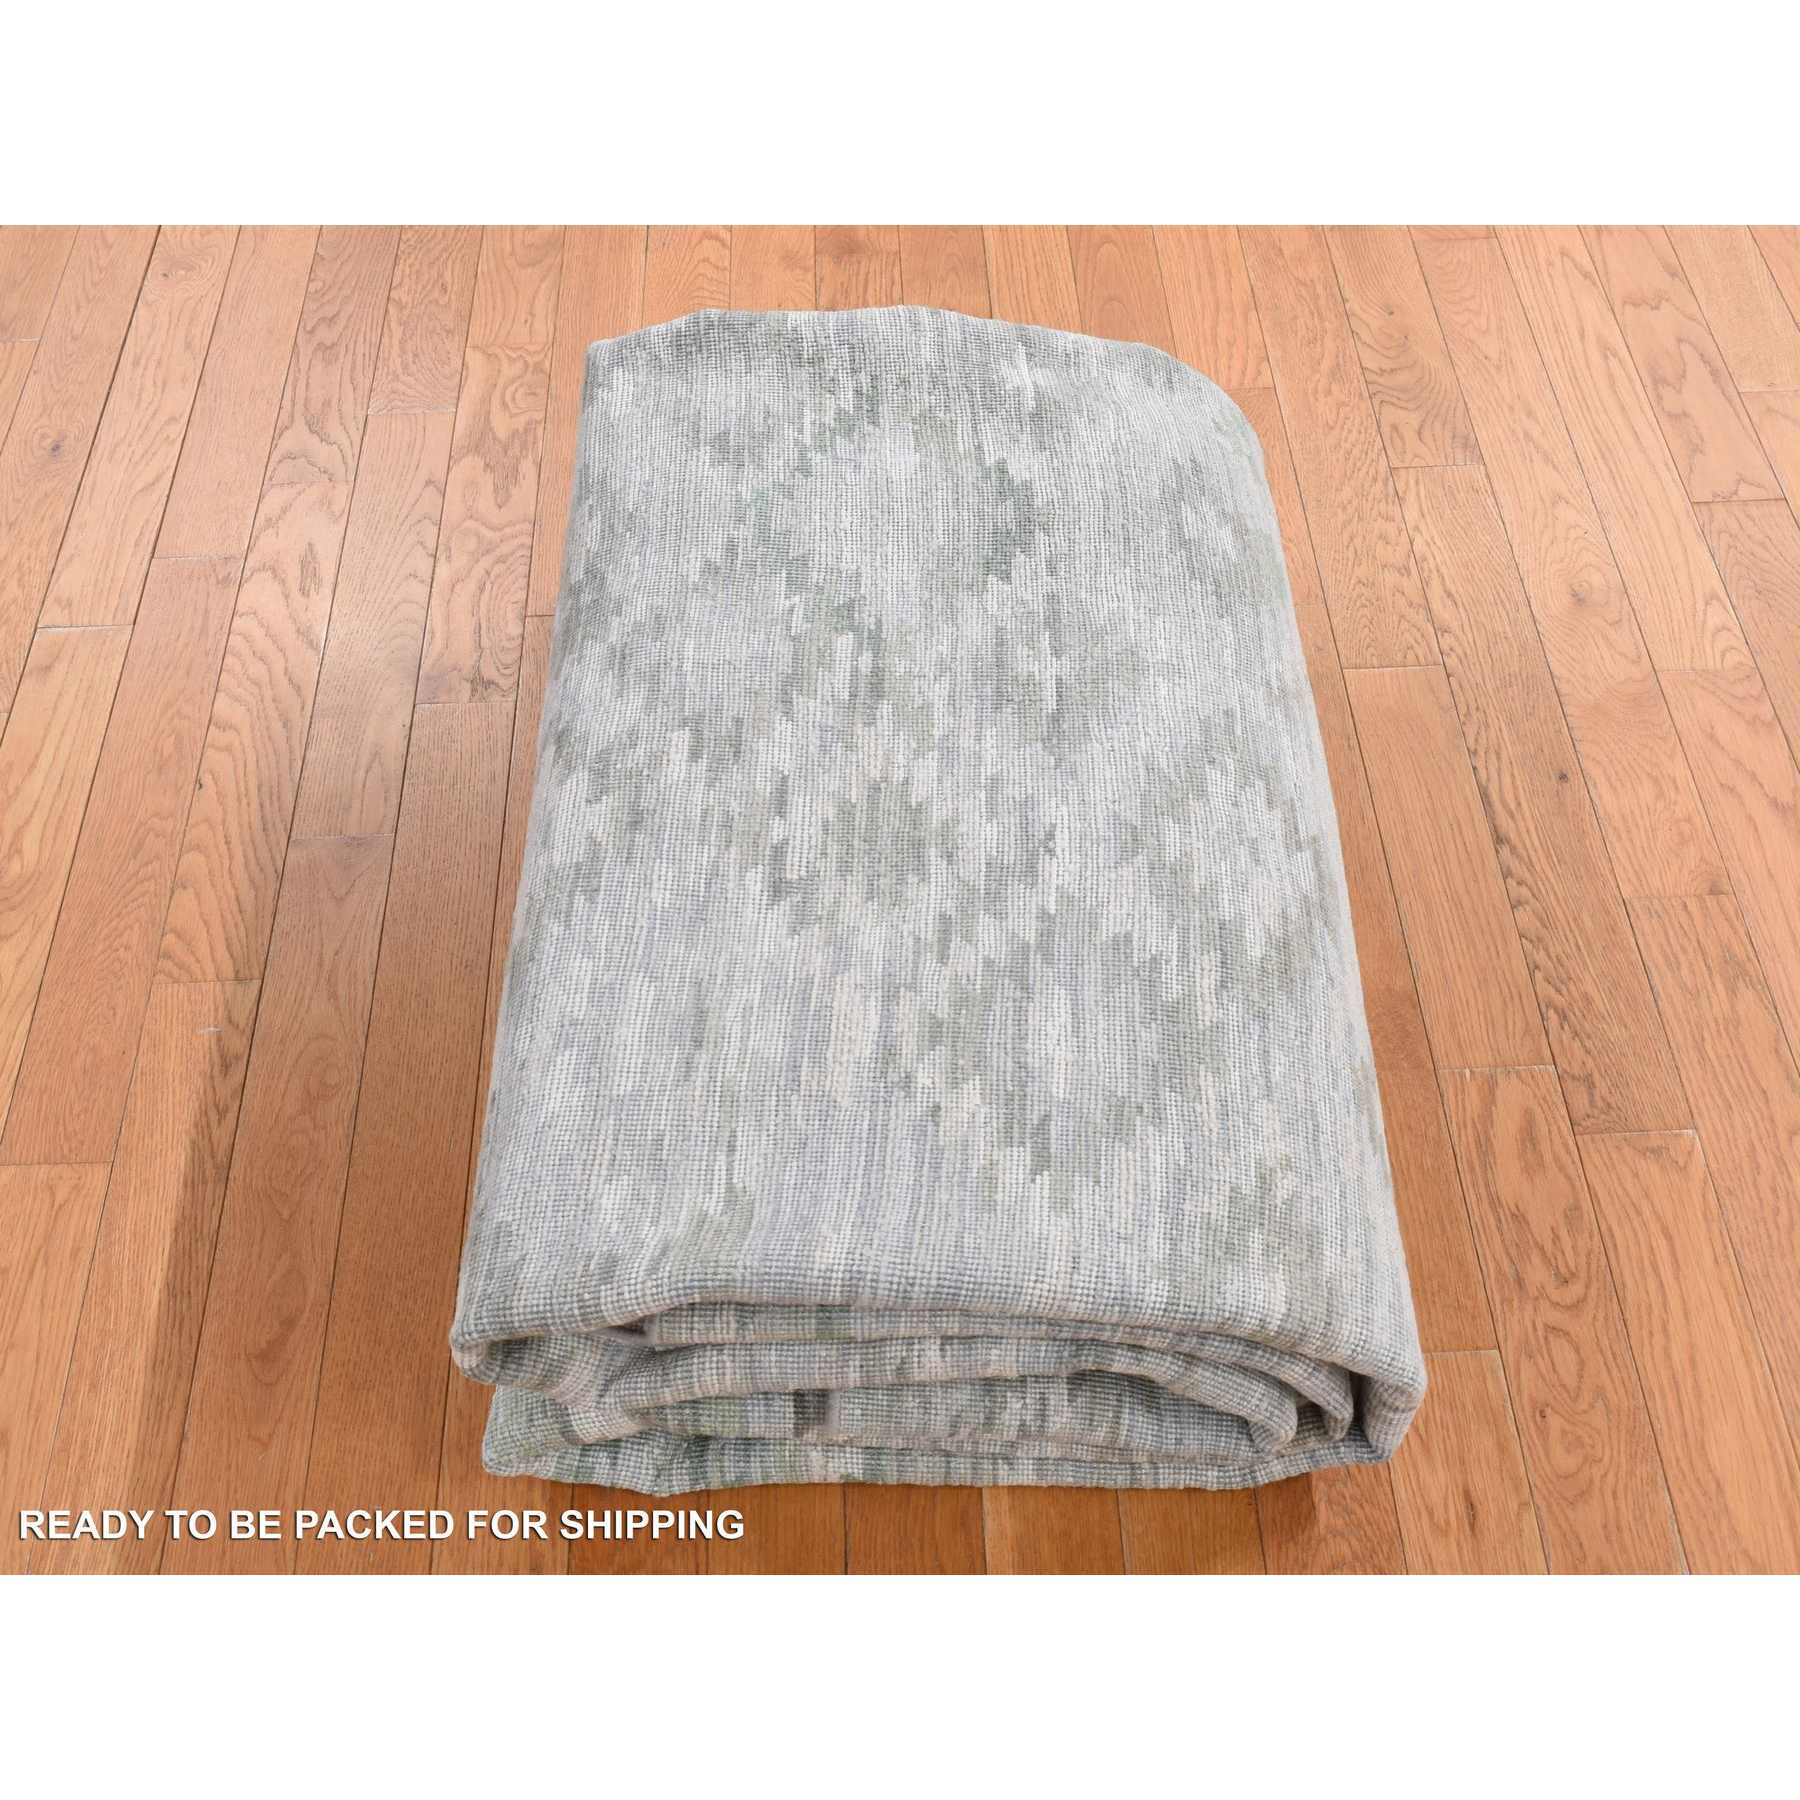 Modern-and-Contemporary-Hand-Knotted-Rug-404200